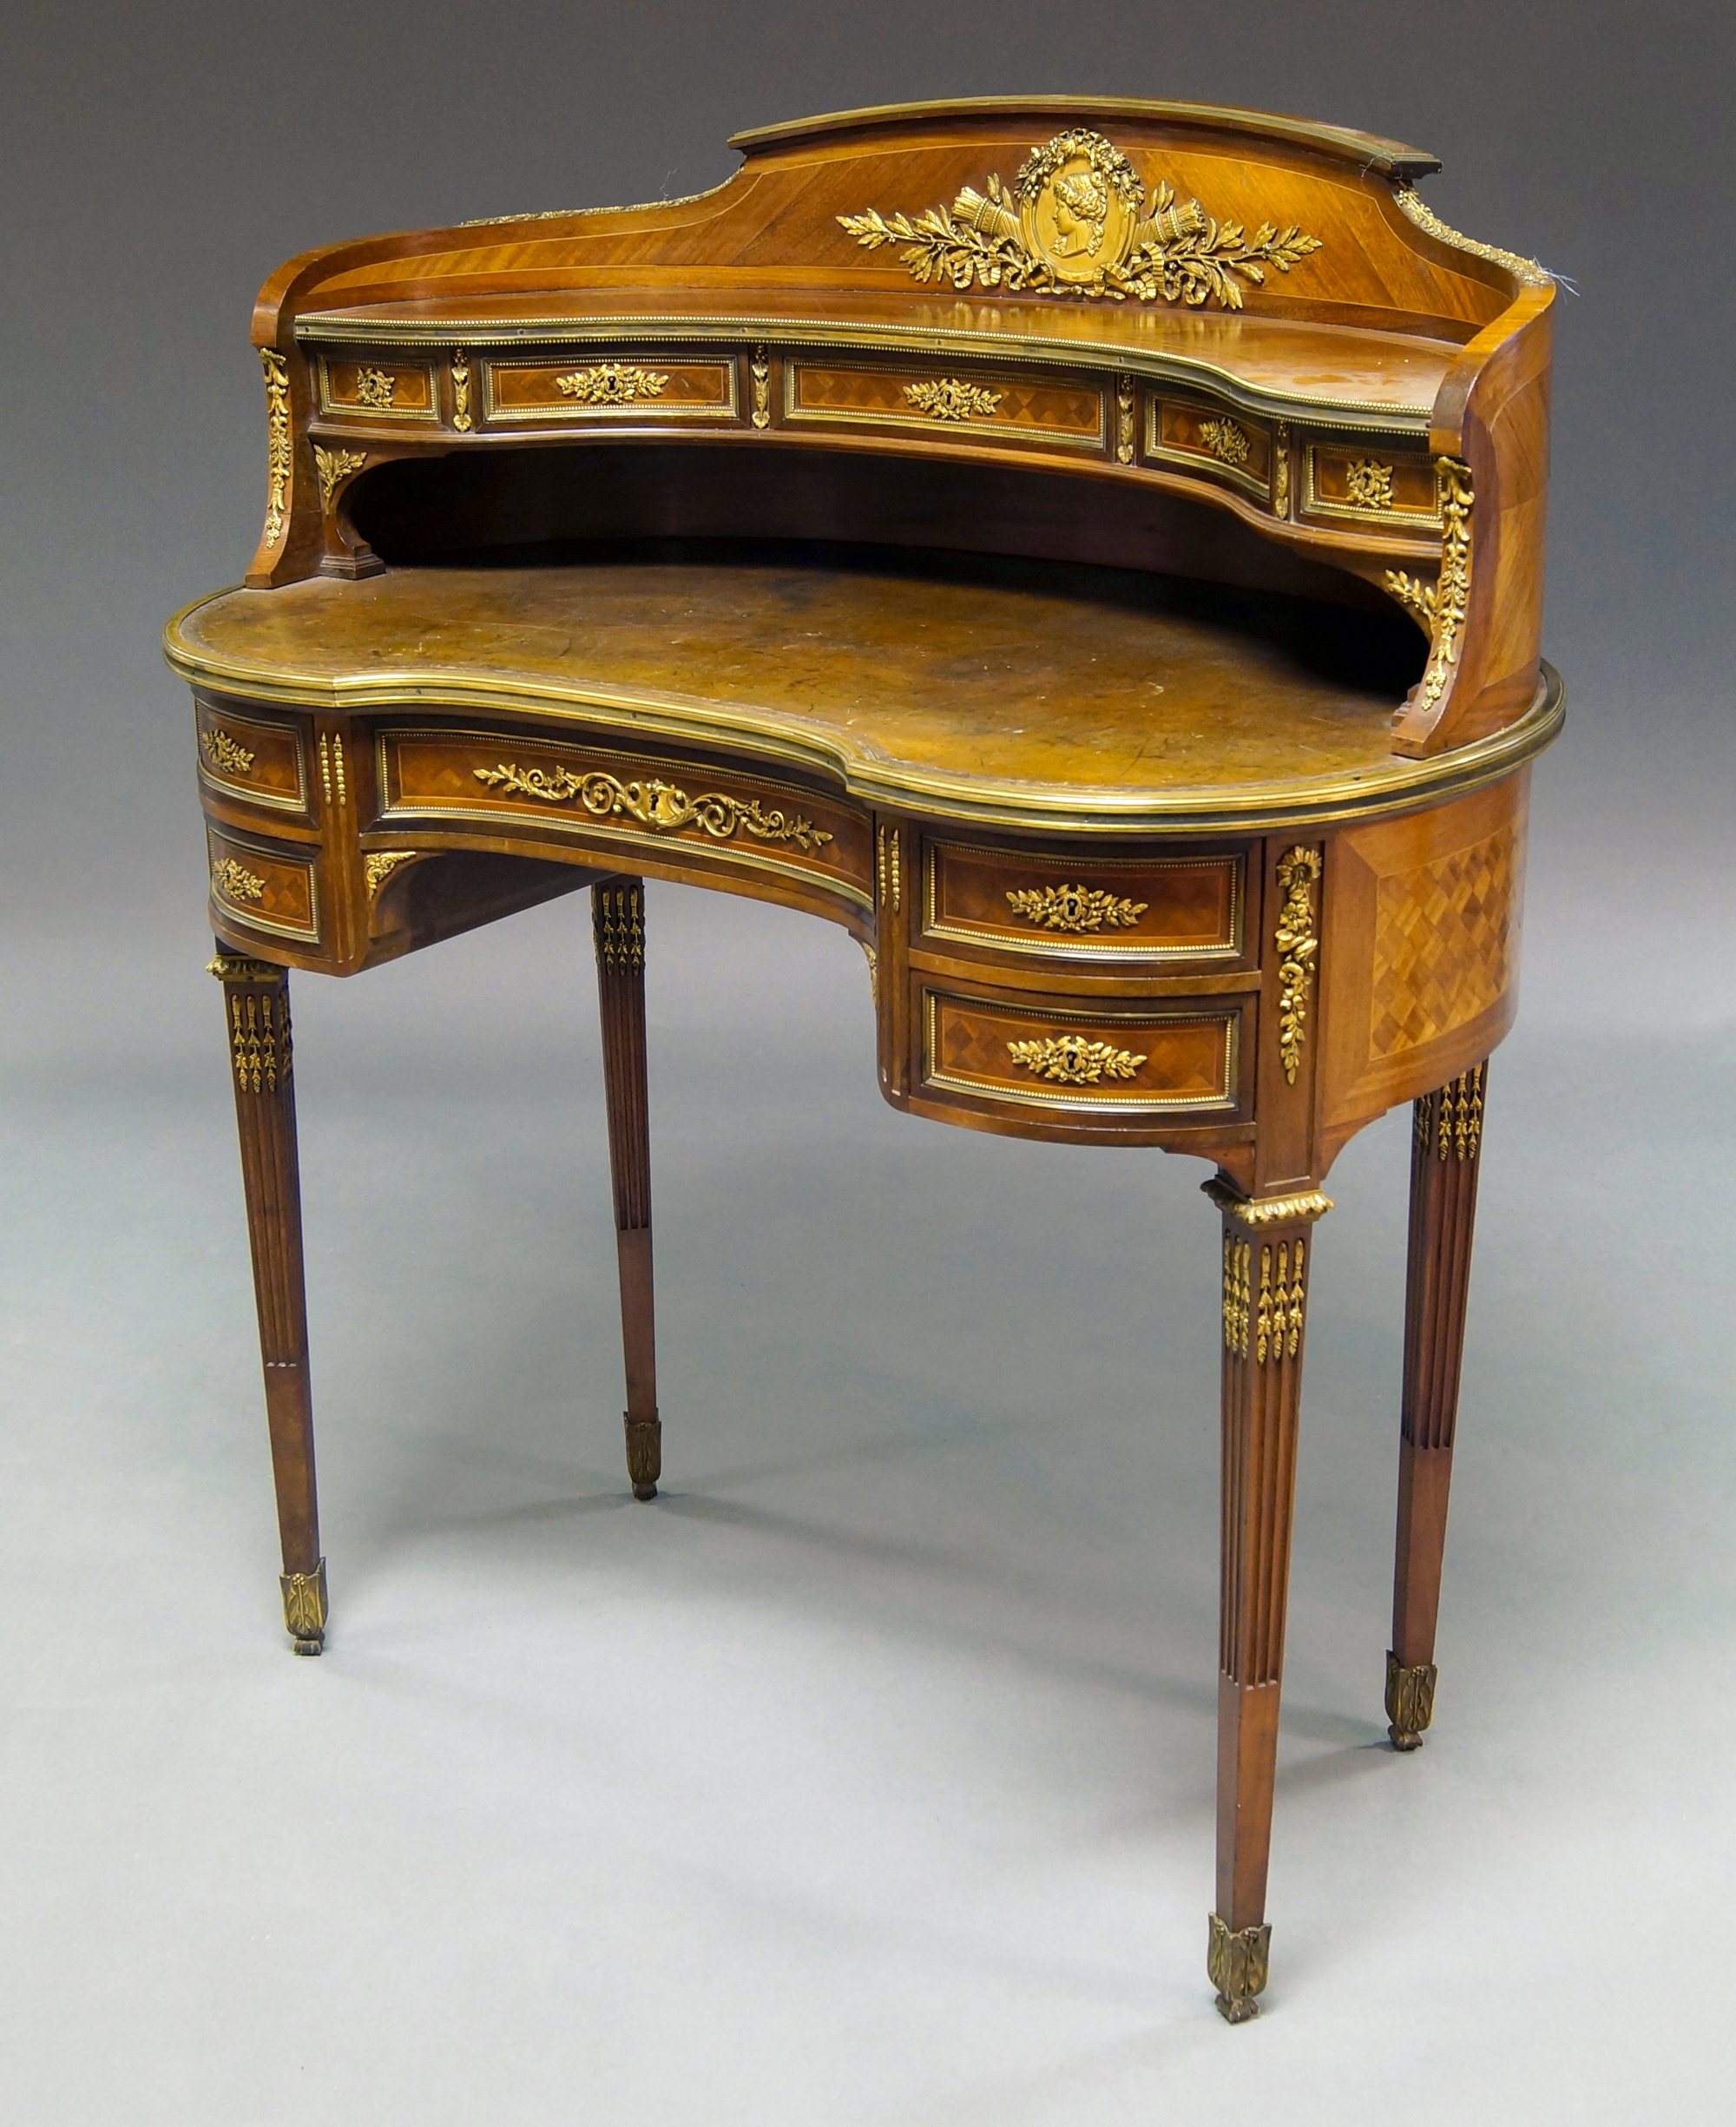 Early 20th century French ormolu mounted kidney shaped writing table in the Louis XVI-style. Price realized: £5,166. Roseberys image